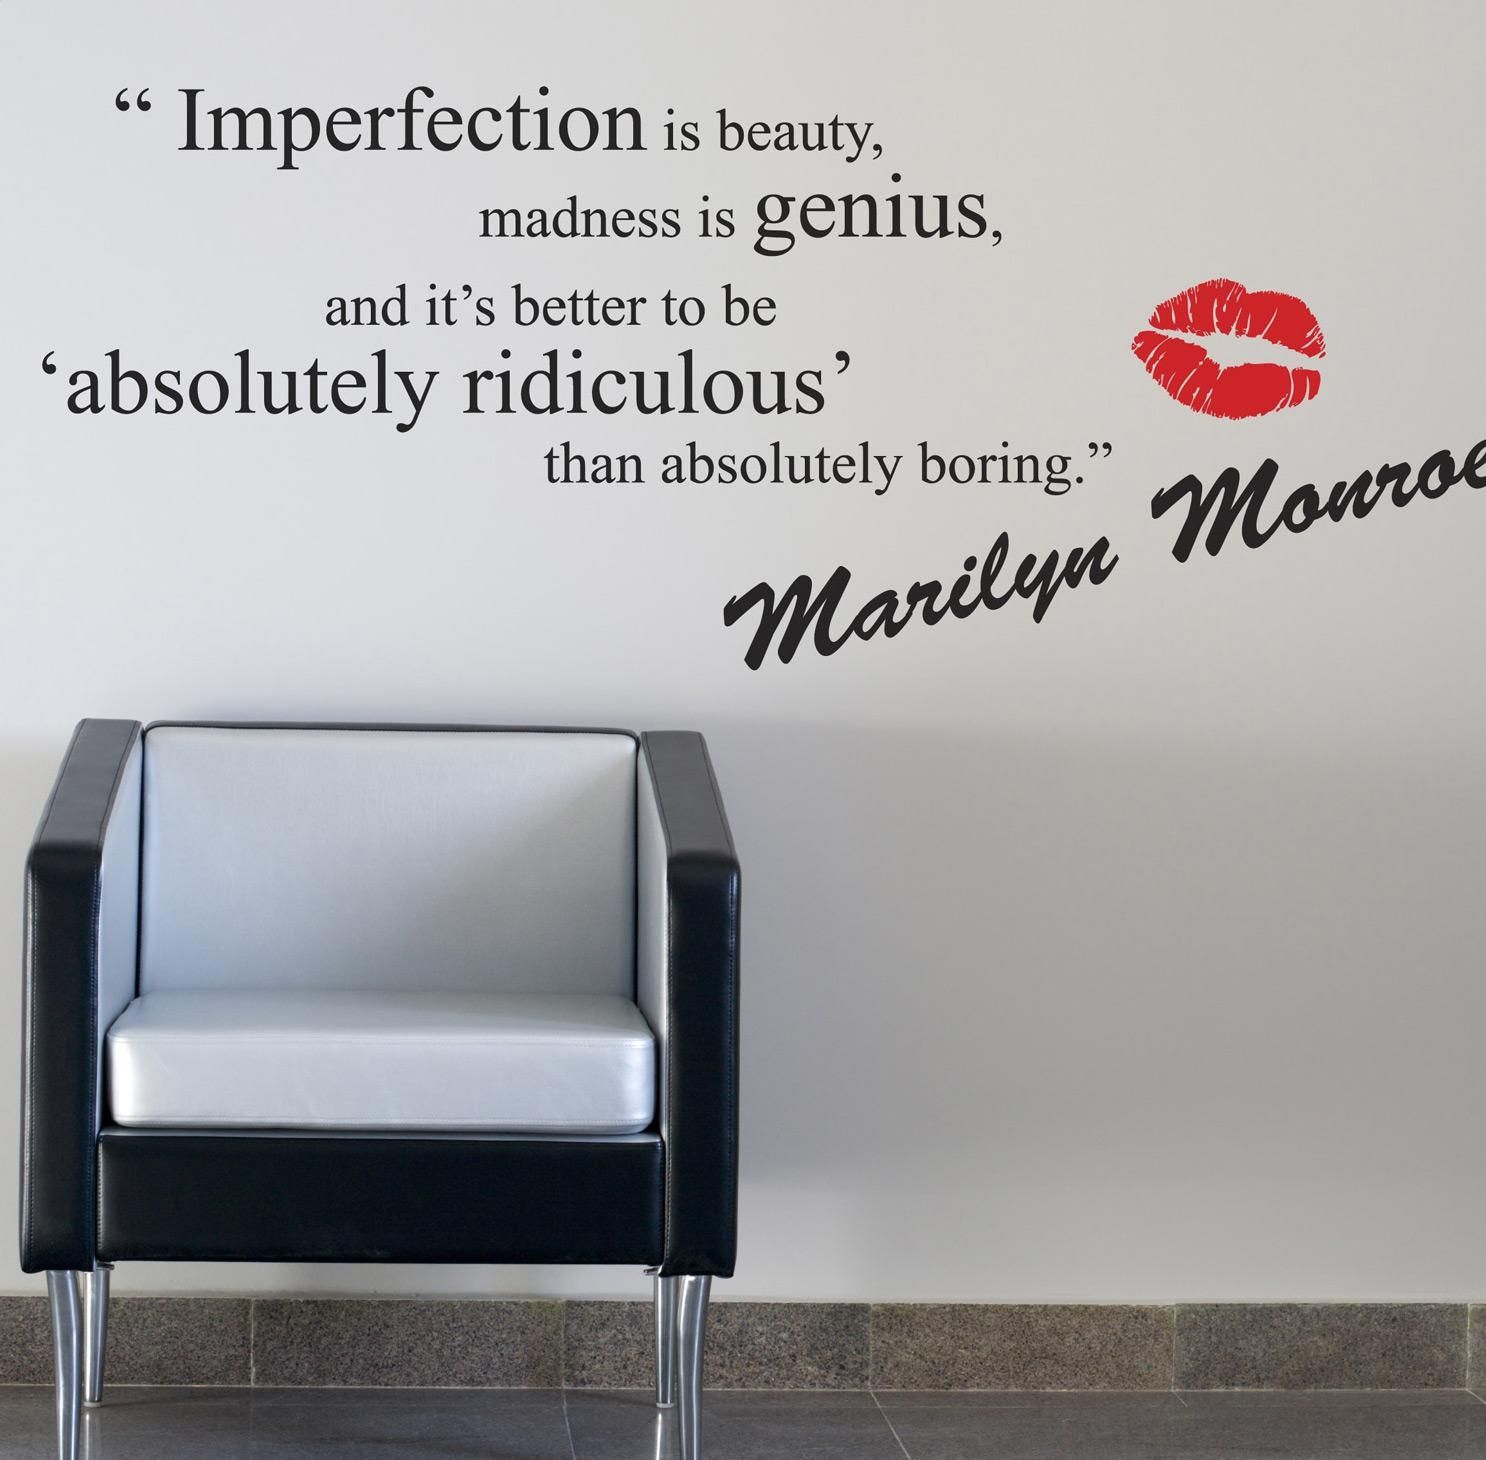 24 Marilyn Monroe Quotes Wall Decals, To Be Absolutely Ridiculous Regarding Marilyn Monroe Wall Art Quotes (View 5 of 20)